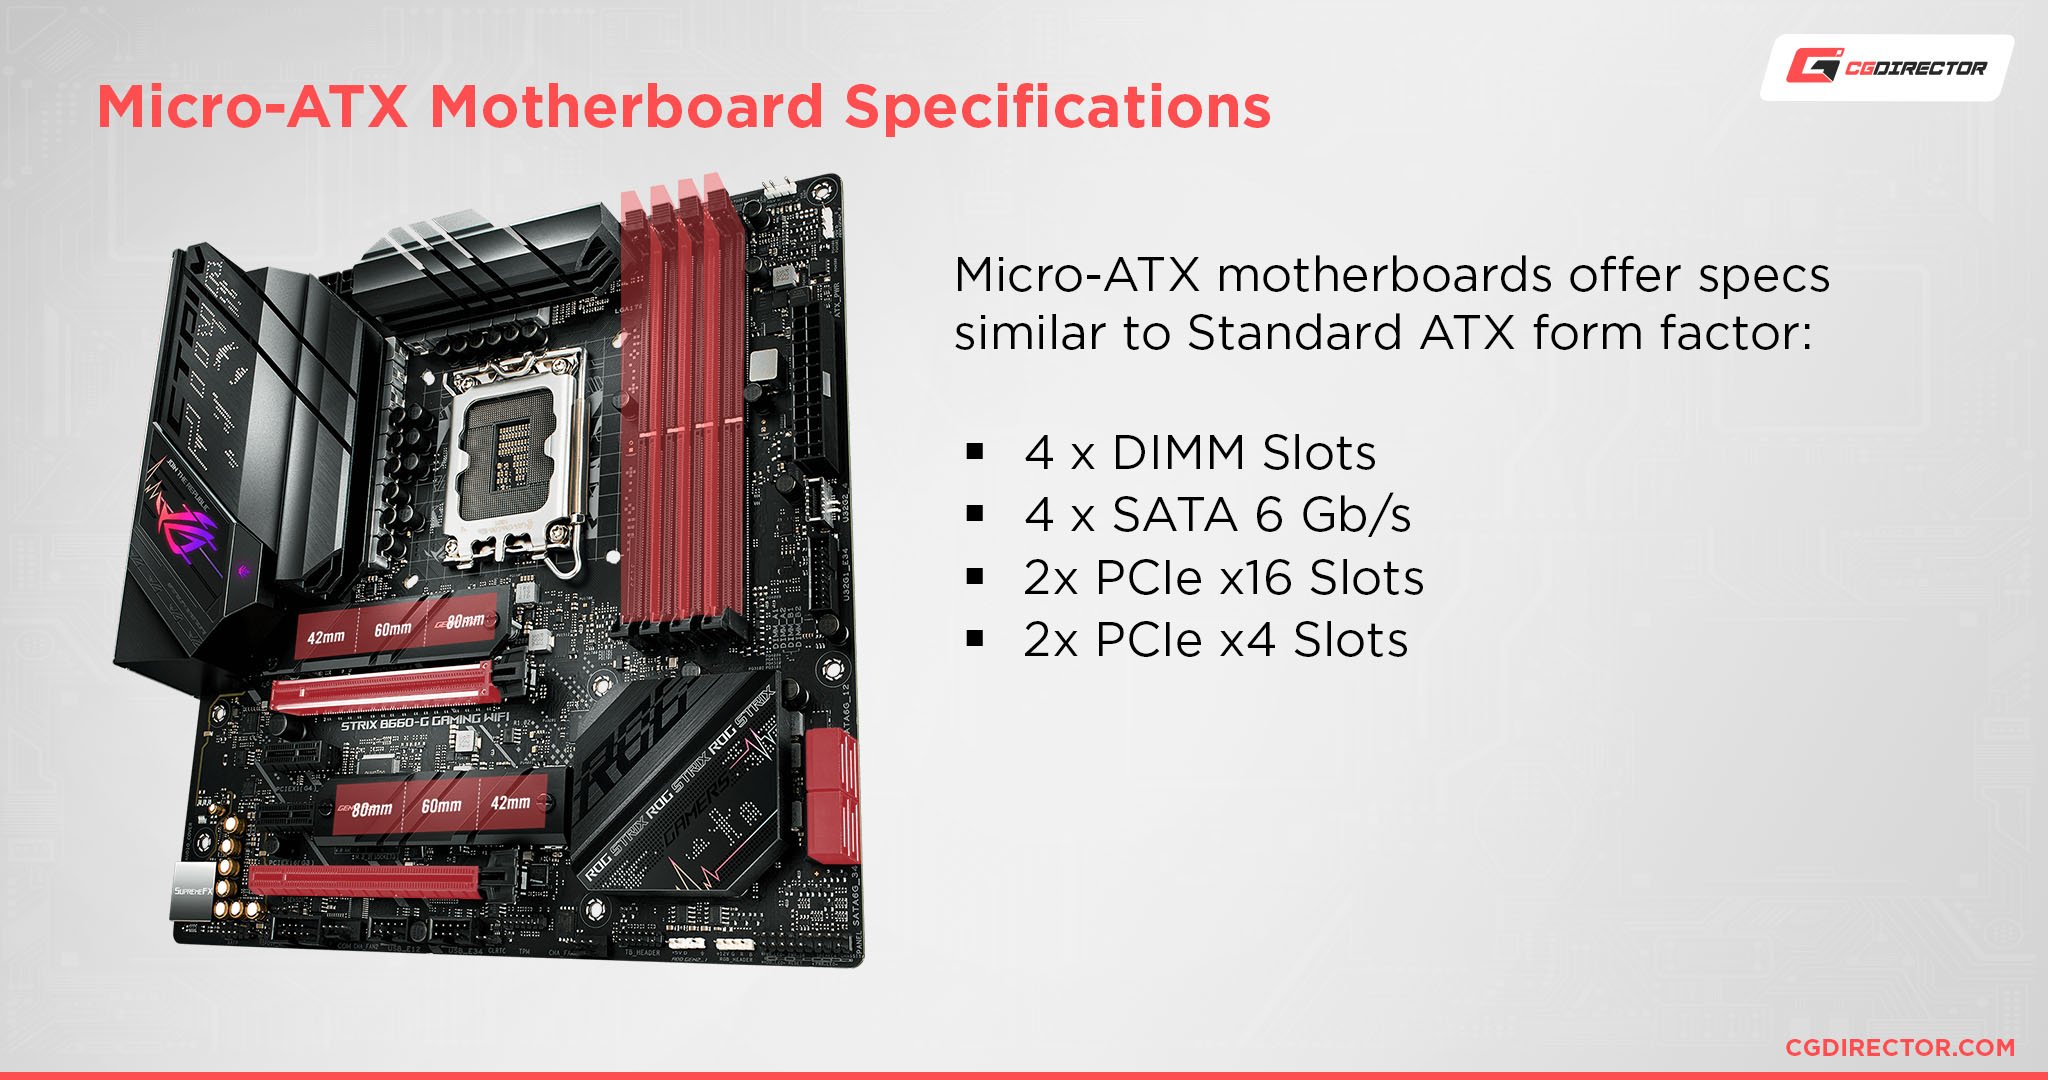 EATX vs ATX Motherboards: What's The Difference and Which Do You Need?